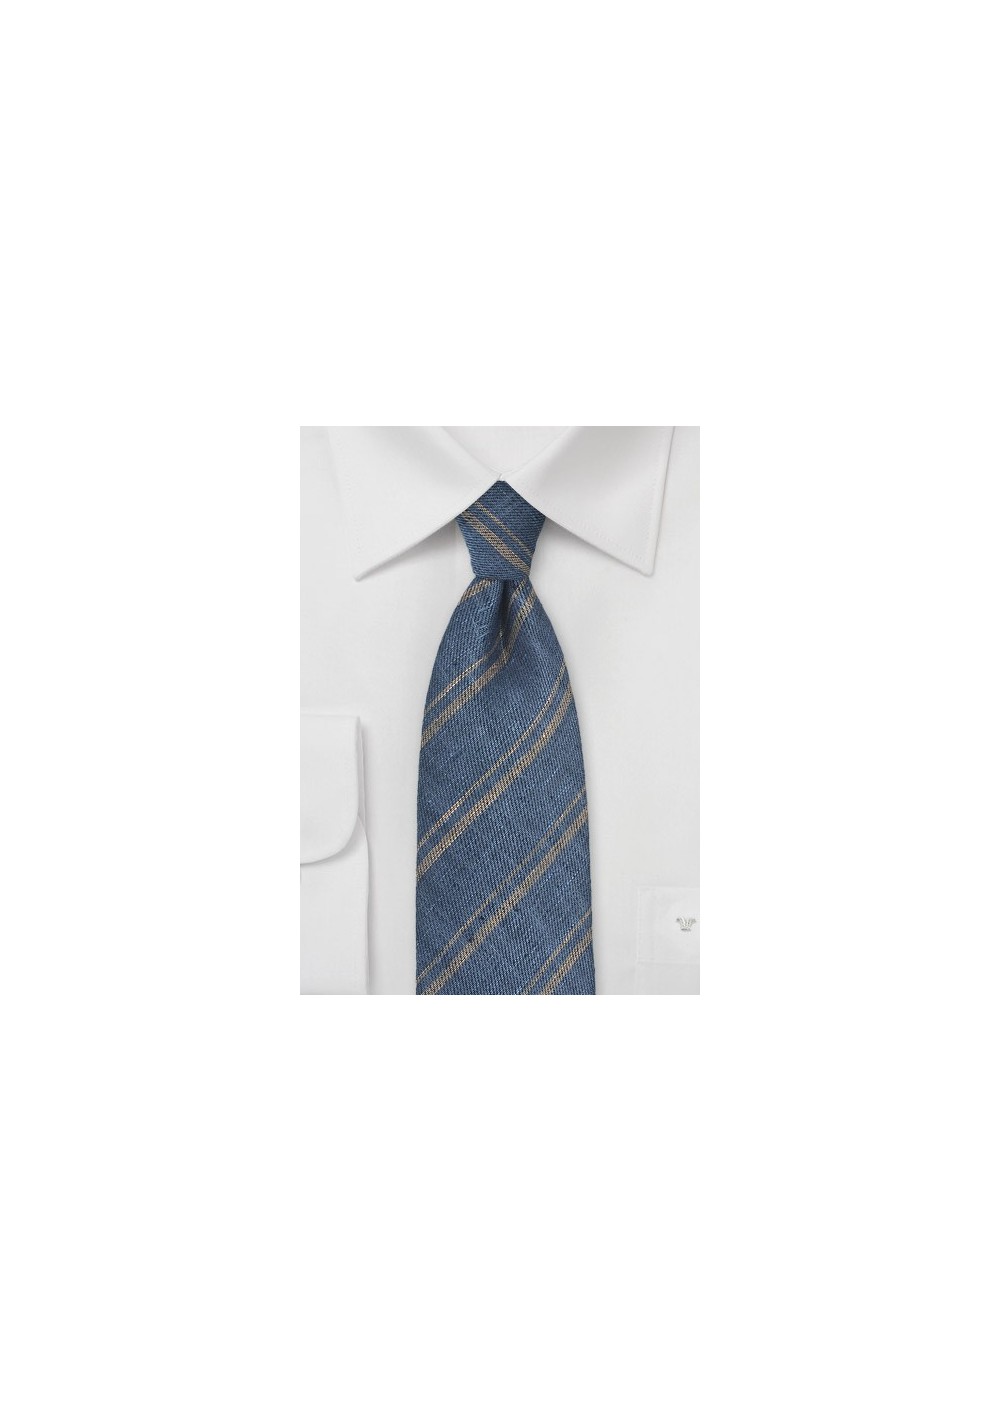 Steel Blue Linen Tie with Sand Colored Stripes